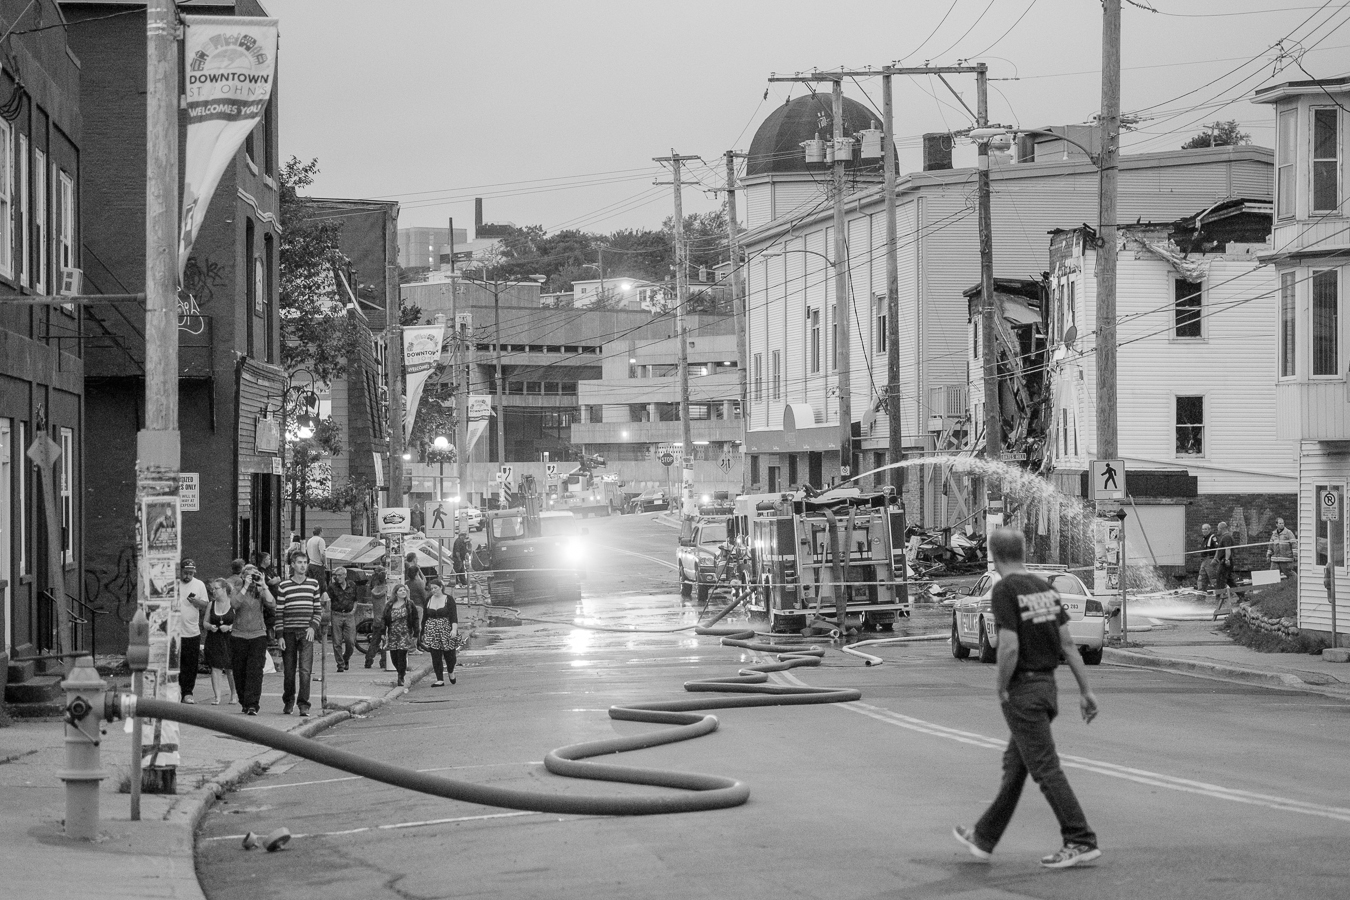 Firefighters and onlookers at the scene of another lost block of Downtown - Sept 2013 - Duckworth Street